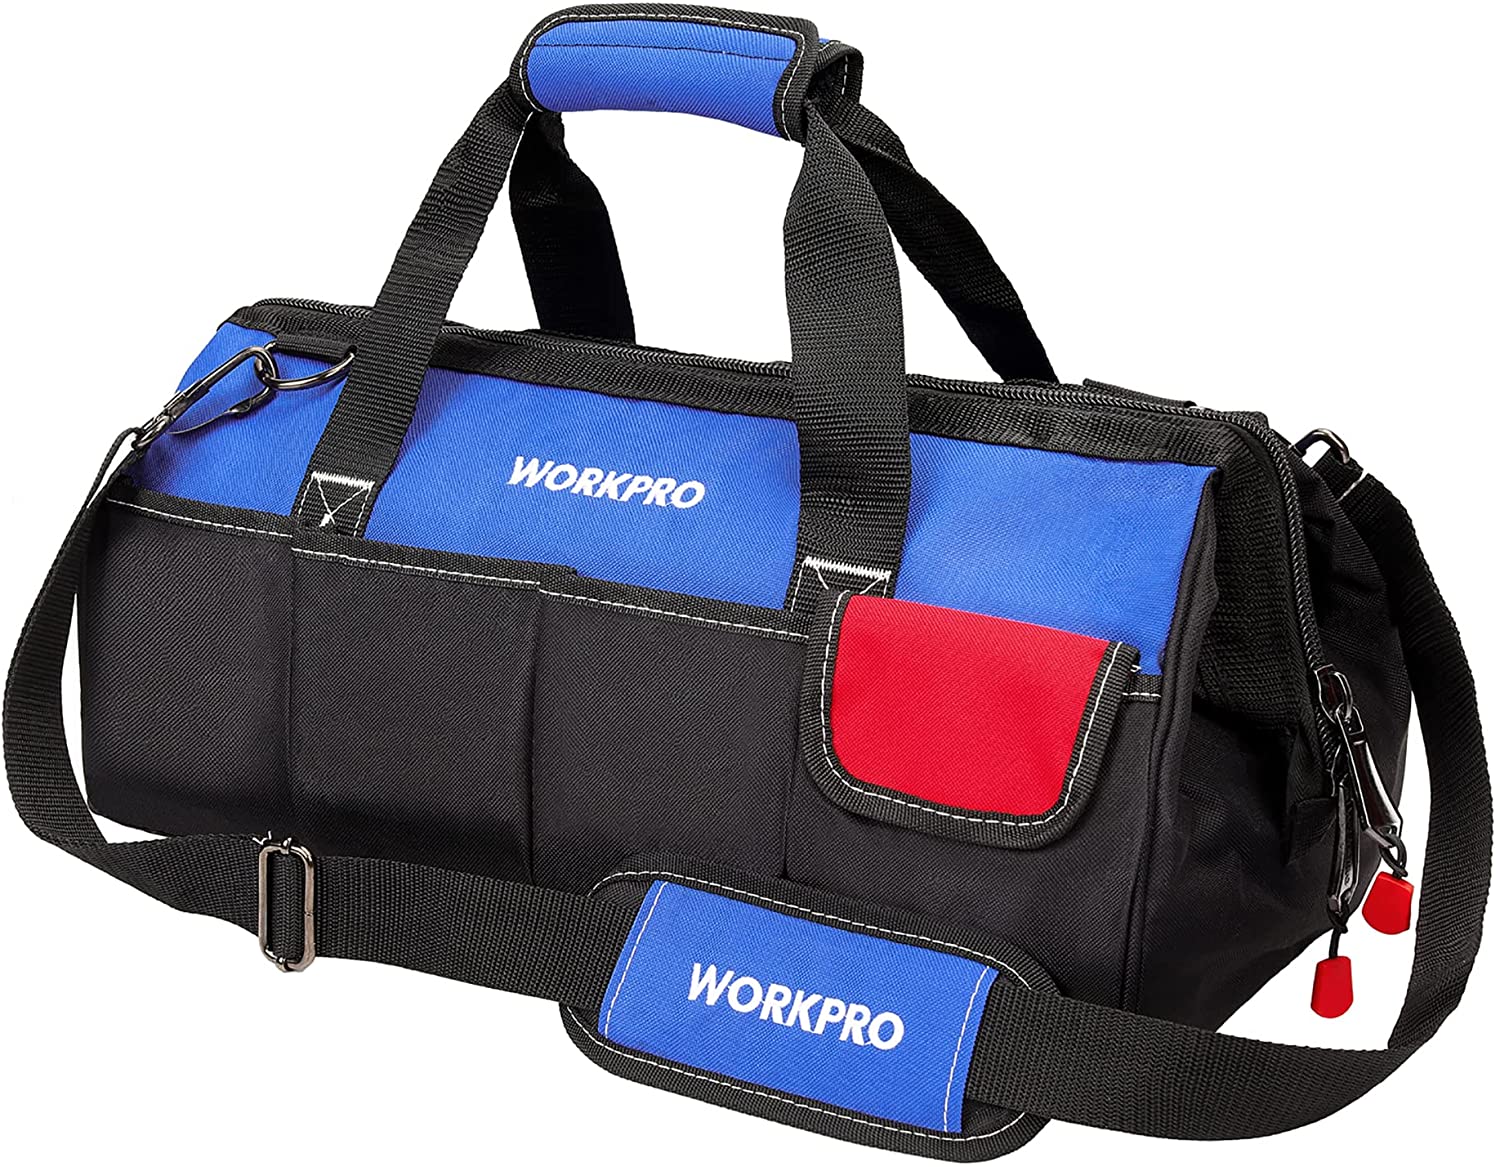 WORKPRO 18-inch Close Top Wide Mouth Storage Tool Bag with Adjustable